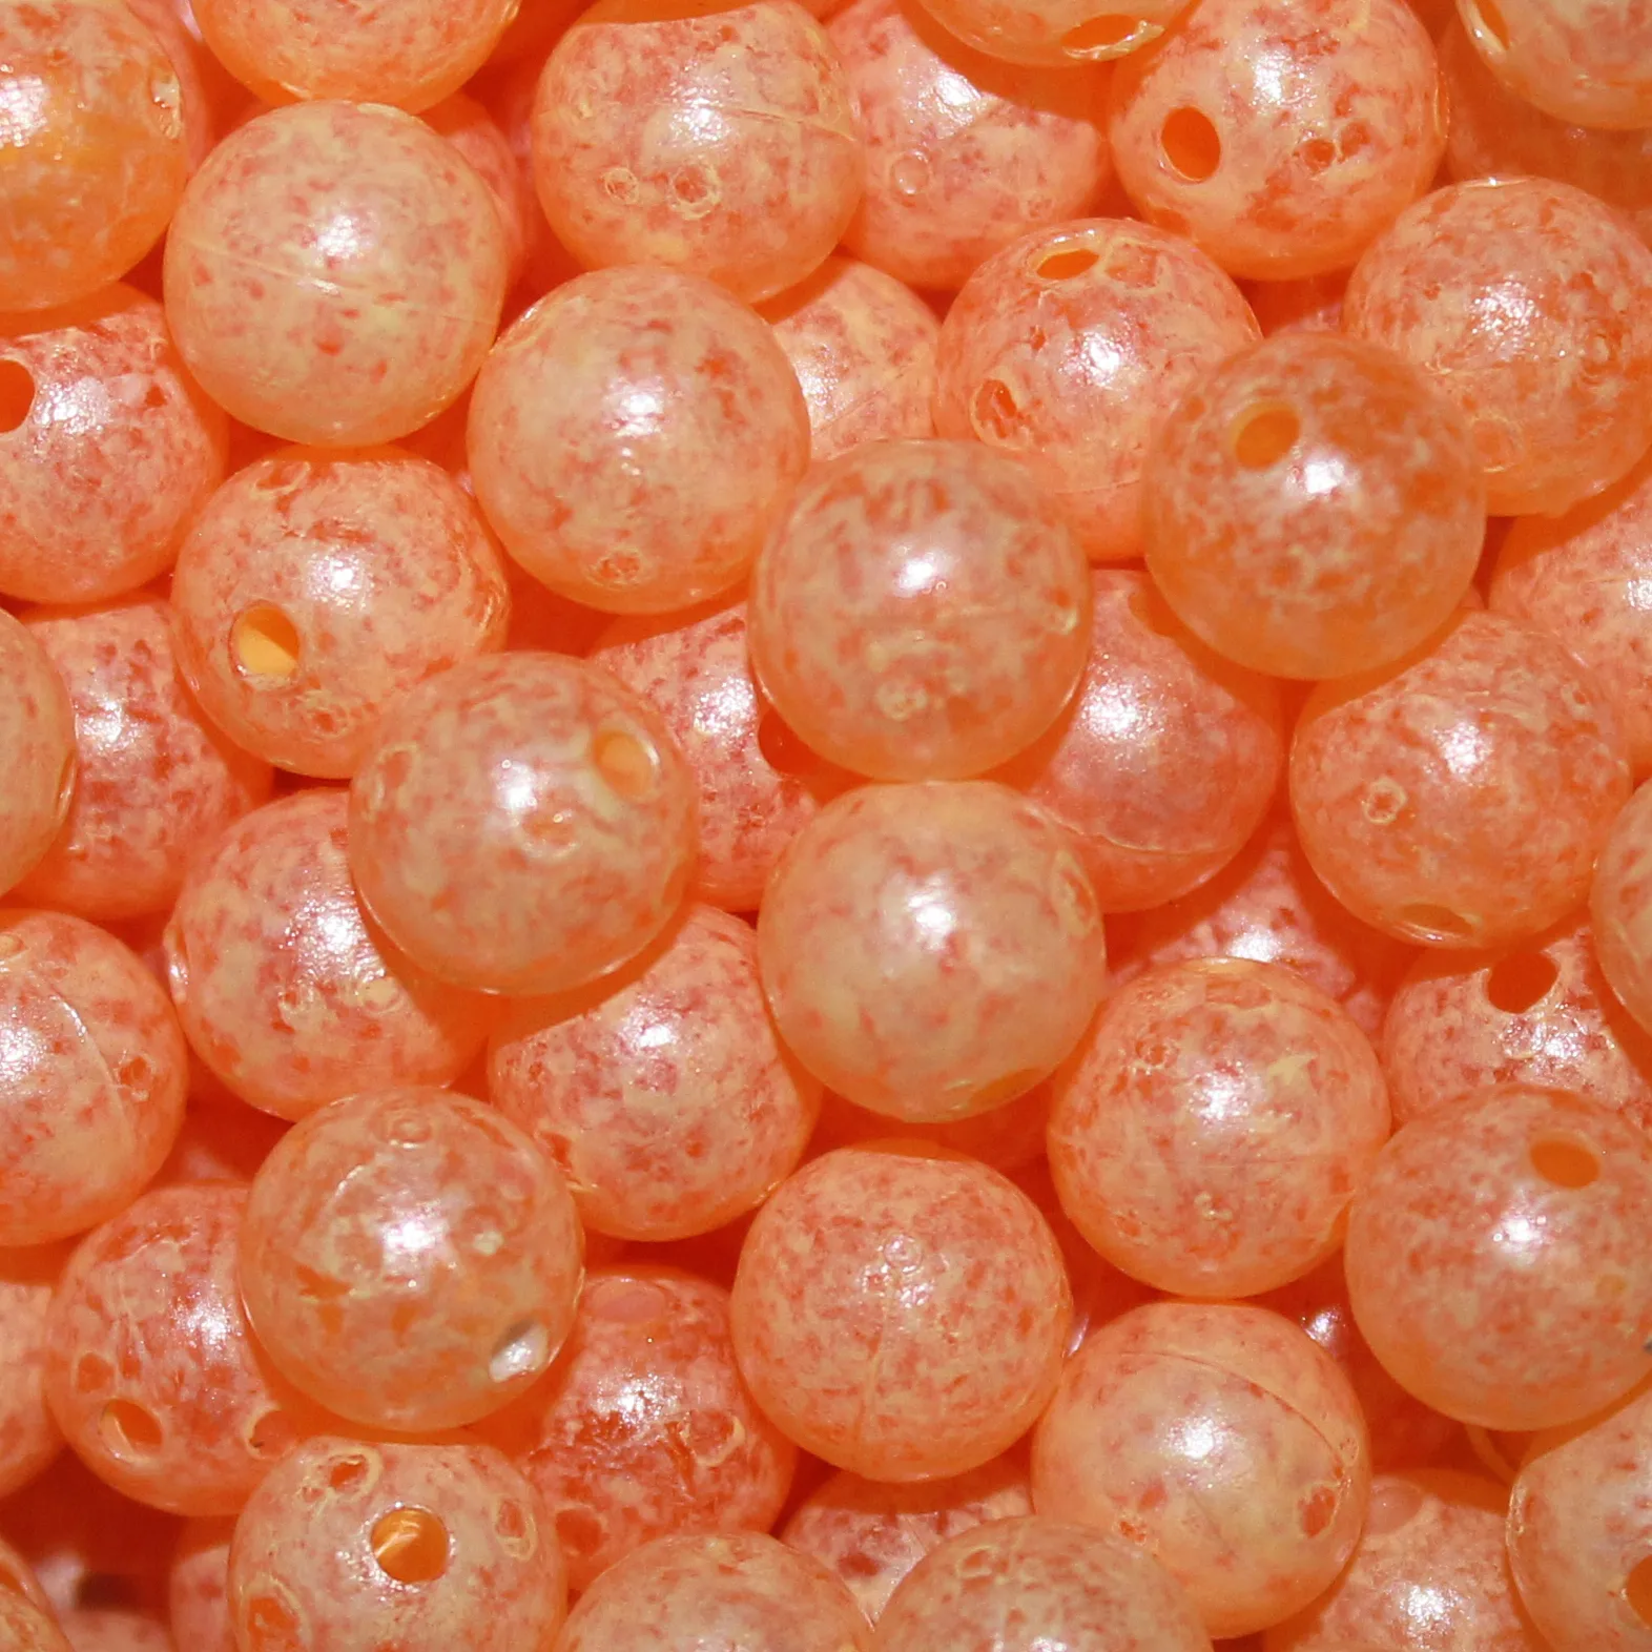 TroutBeads.com, Inc. TROUT BEADS- MOTTLED BEADS